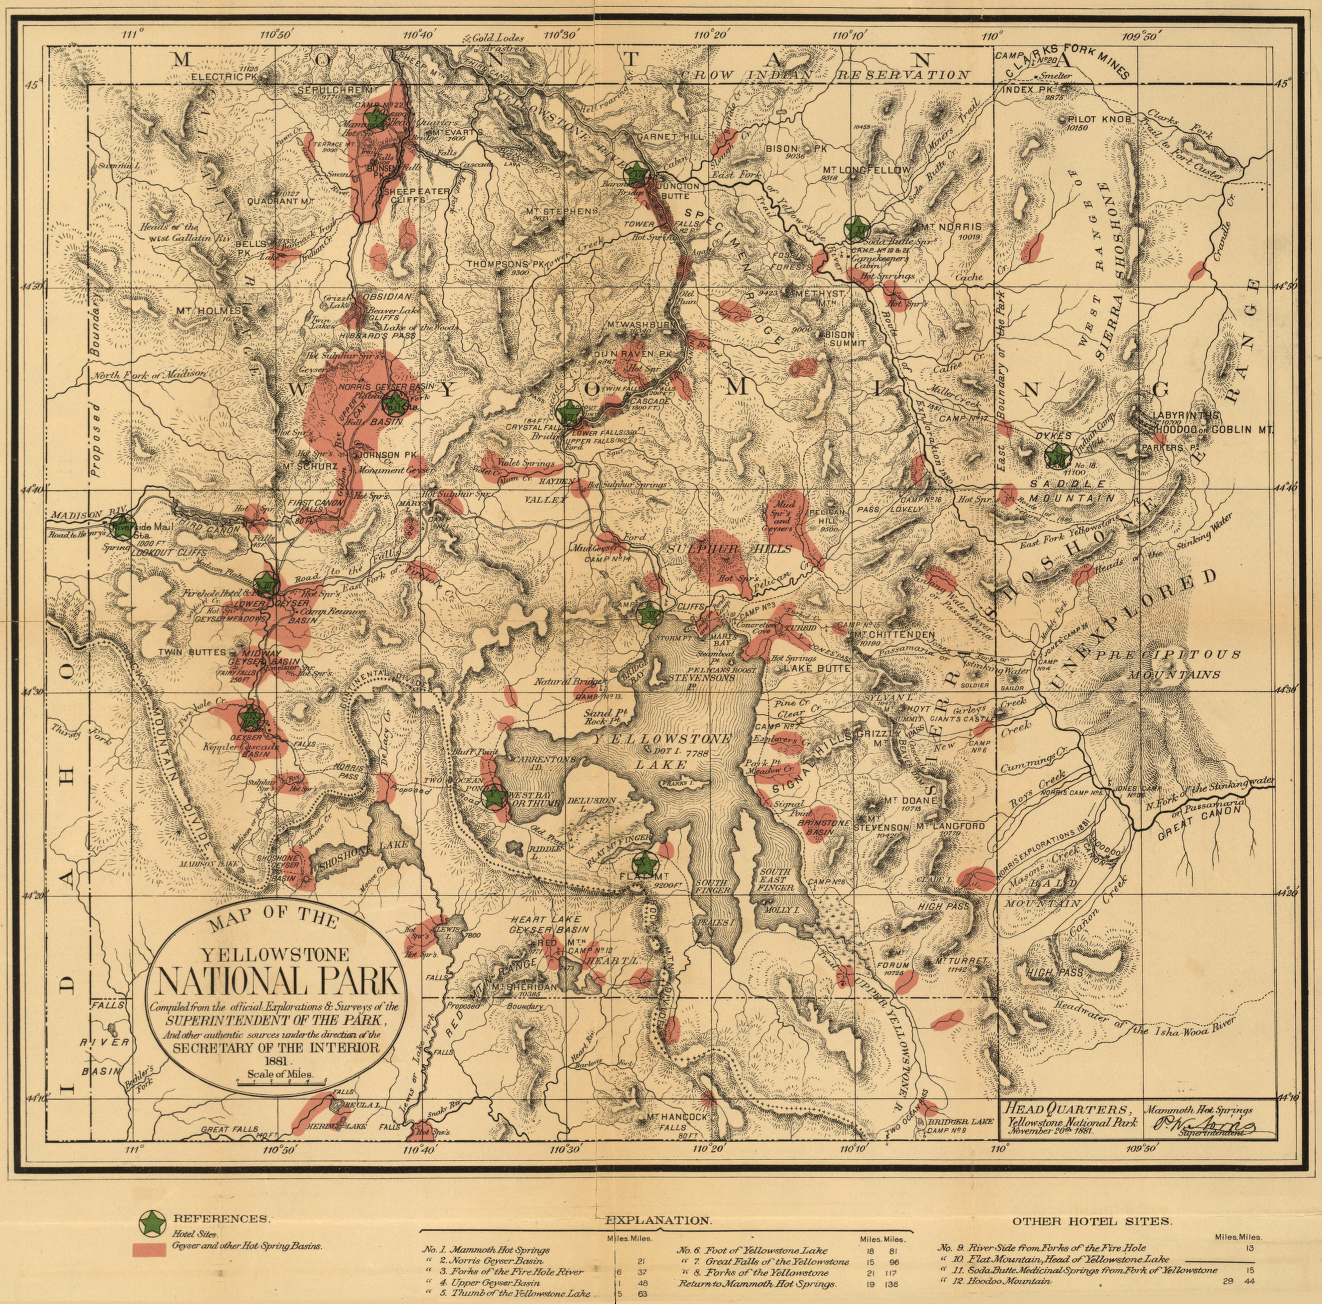 Yellowstone National Park 1881 Historical Map from the Library of Congress Collection